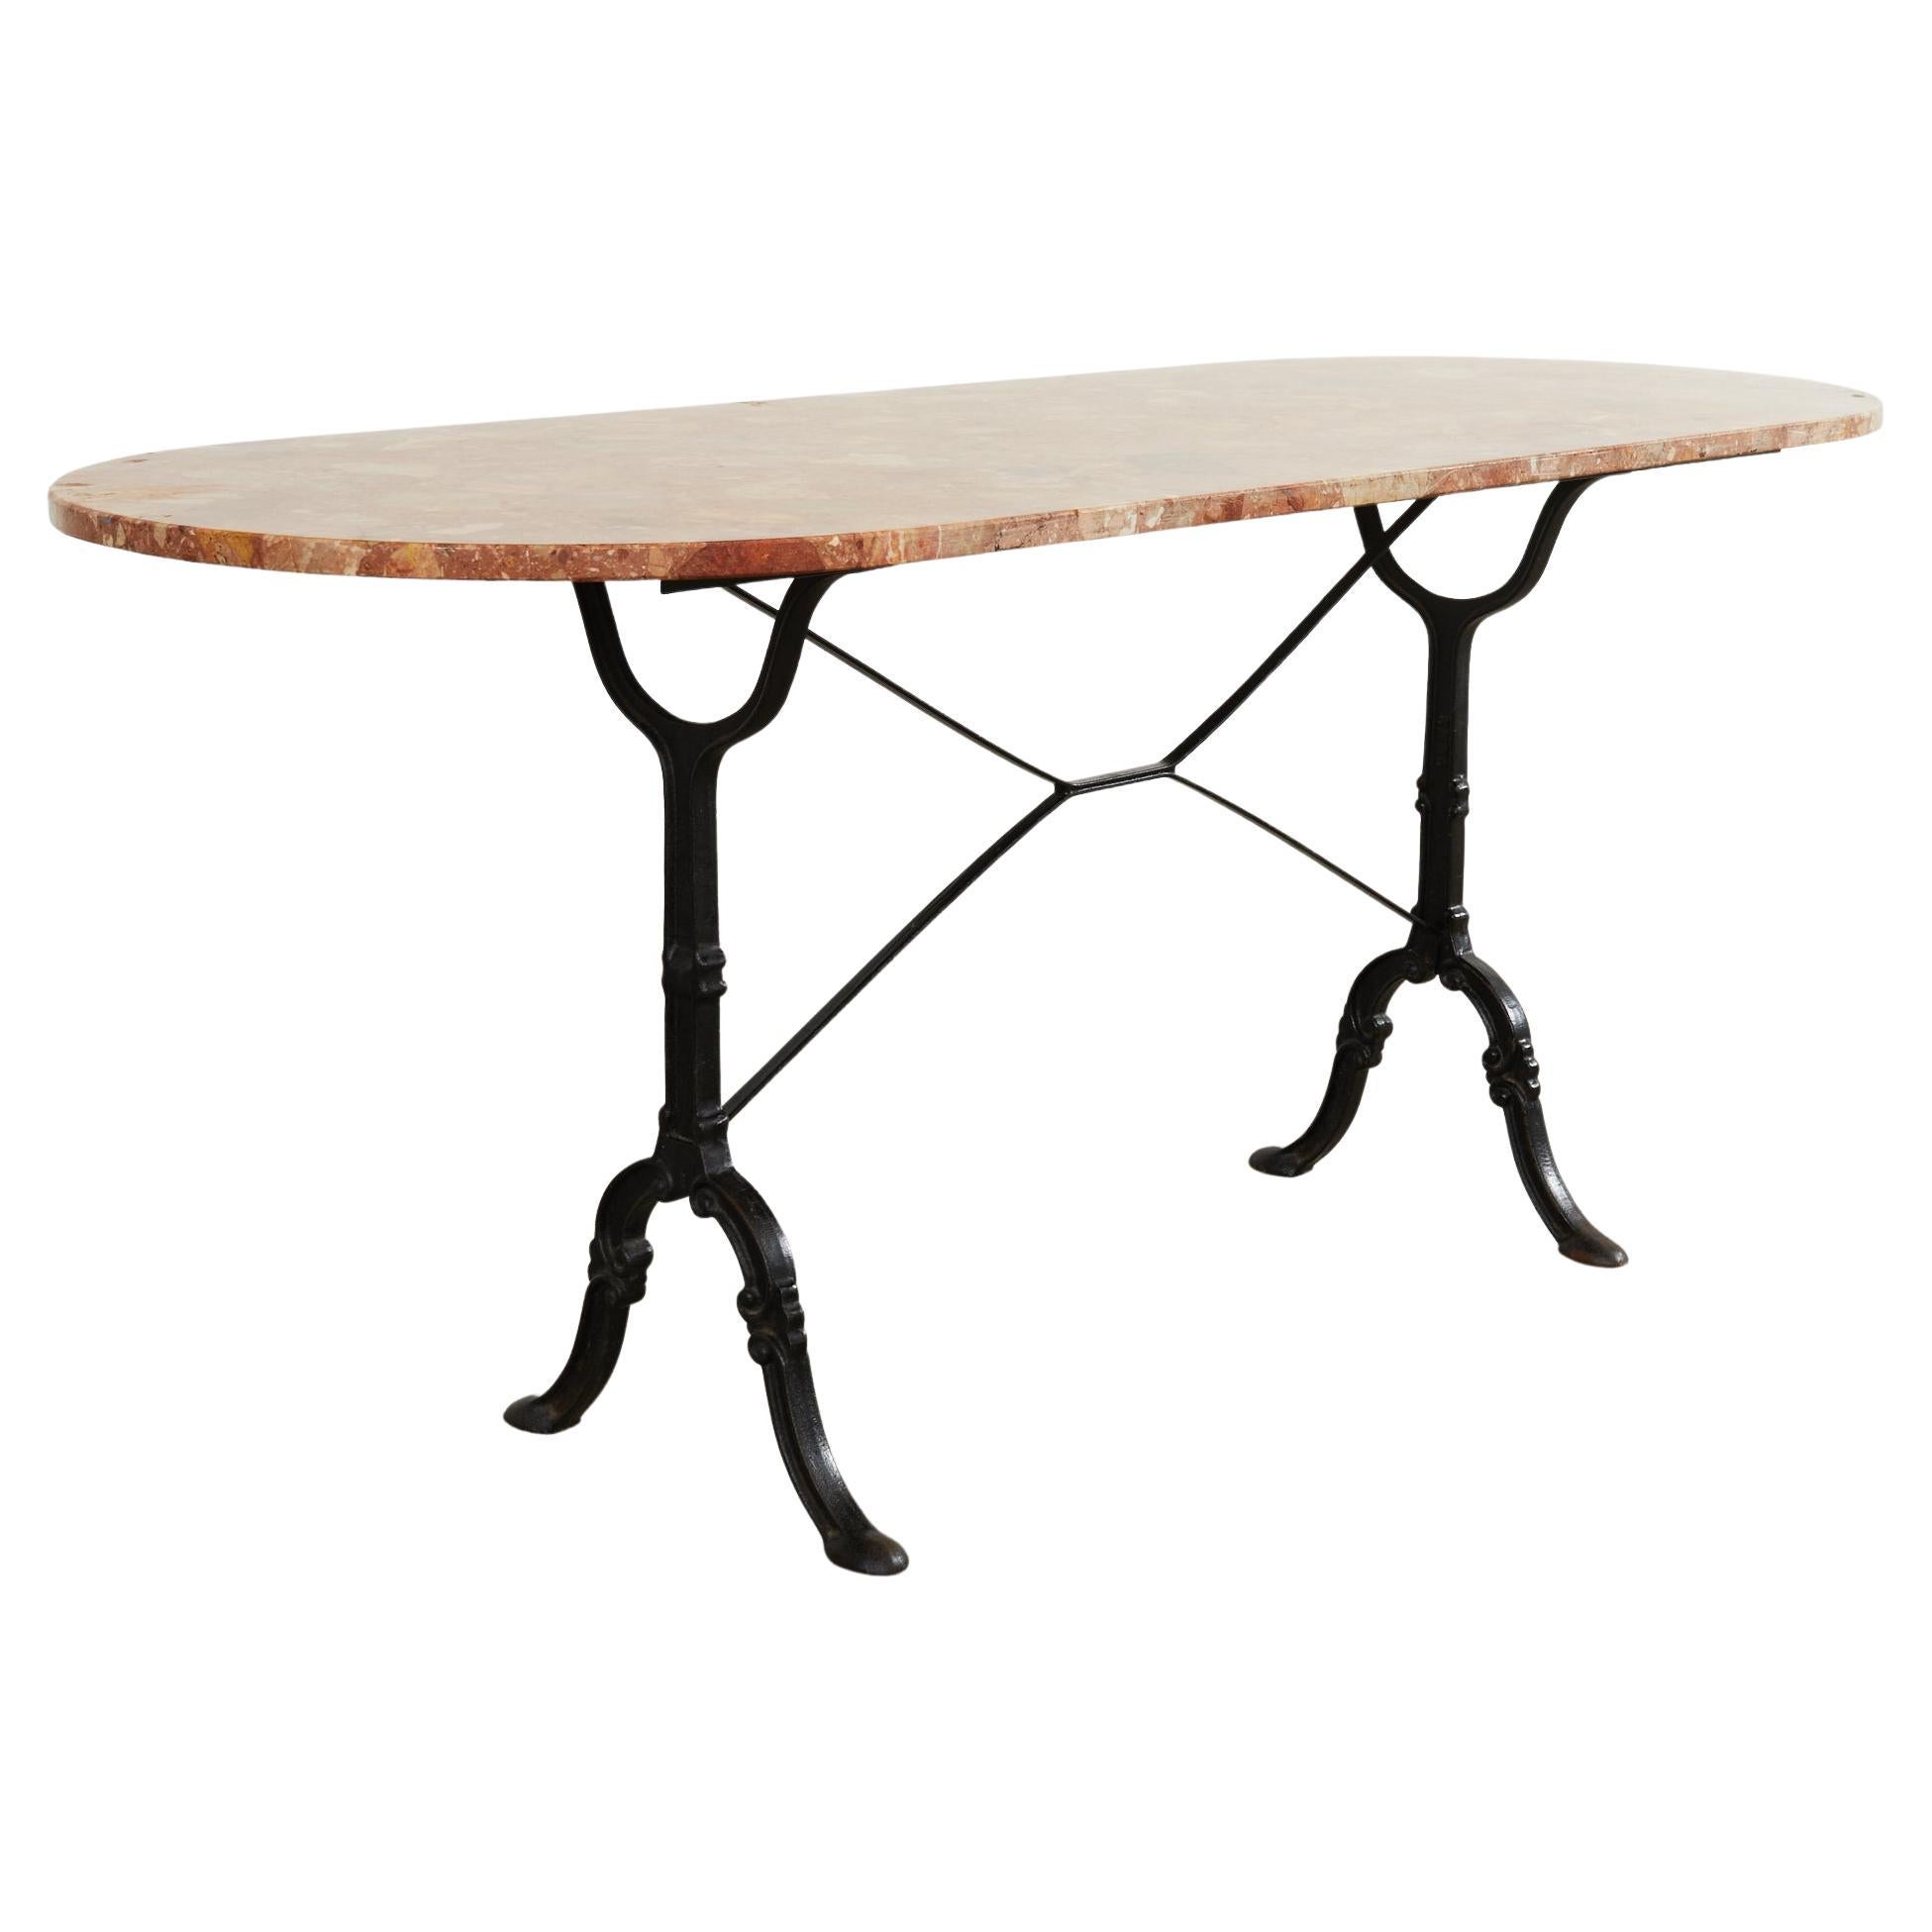 French Iron Marble Top Bistro Garden Dining Table or Console For Sale